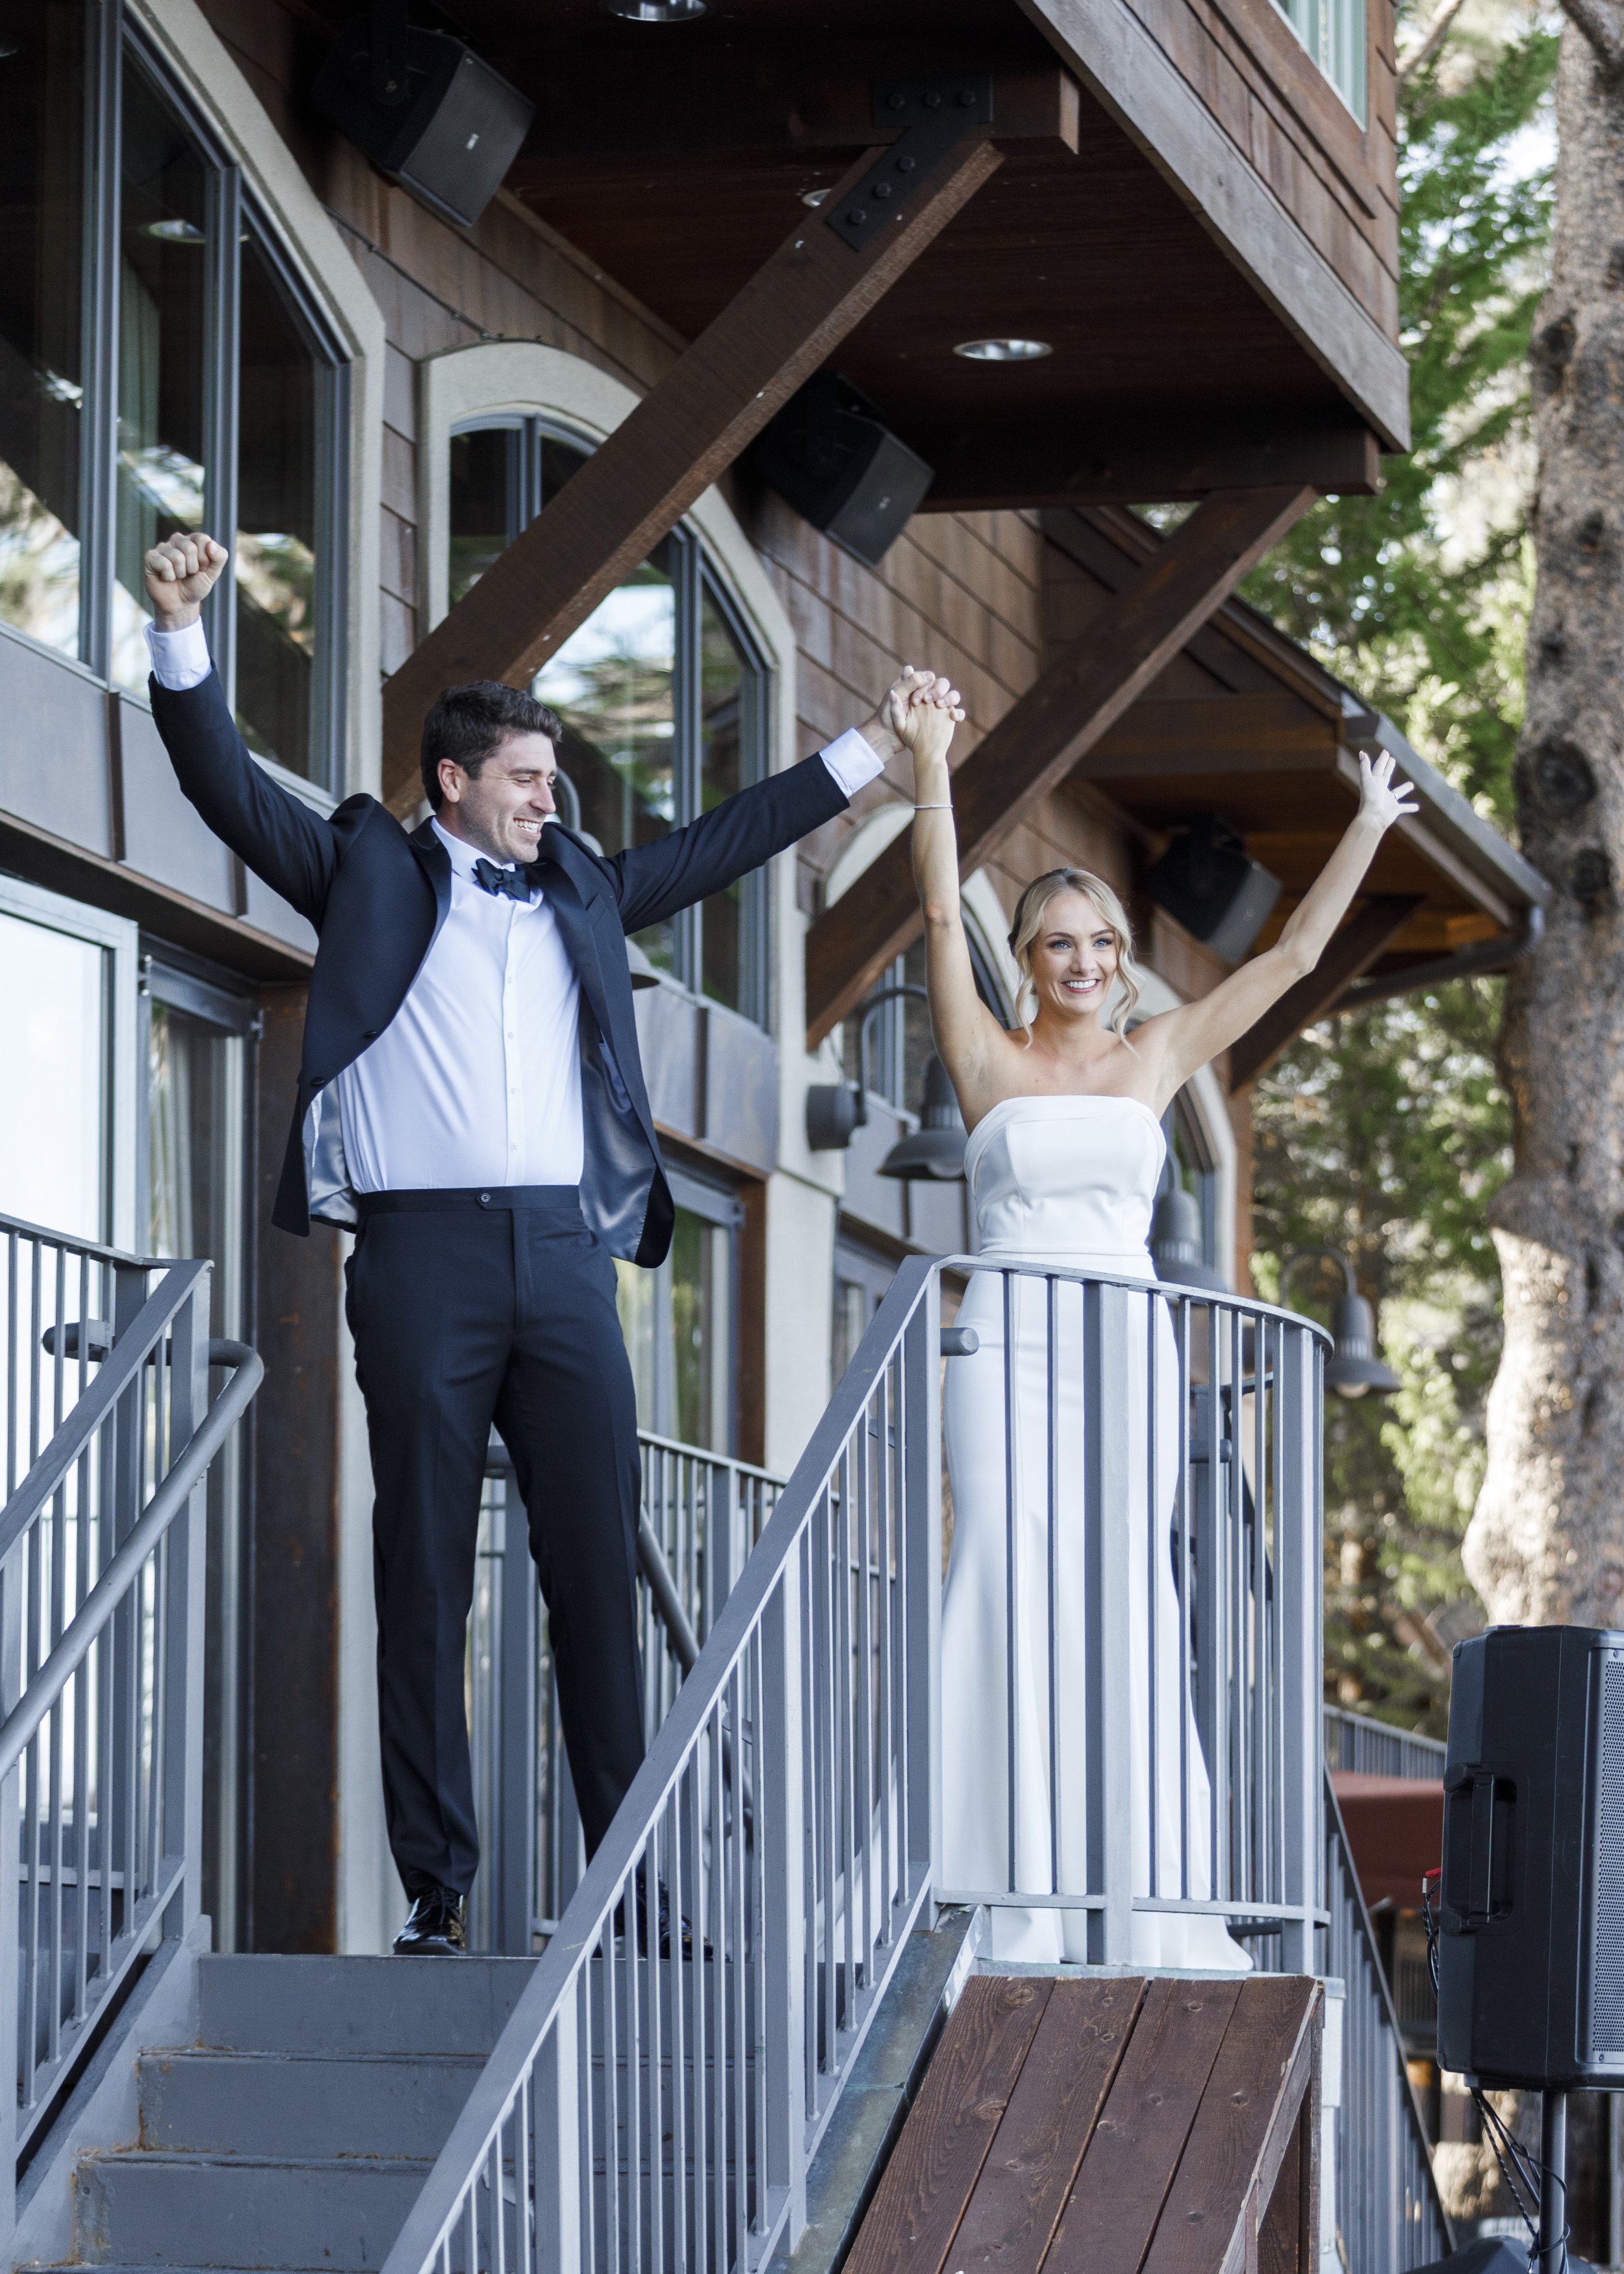  Savanna Richardson Photography captures a bride and groom cheering after their wedding ceremony at Lake Tahoe. Lake wedding ideas newly married #savannarichardsonphotography #tahoewedding #lakesidewedding #outdoorwedding #summerwedding #laketahoe 